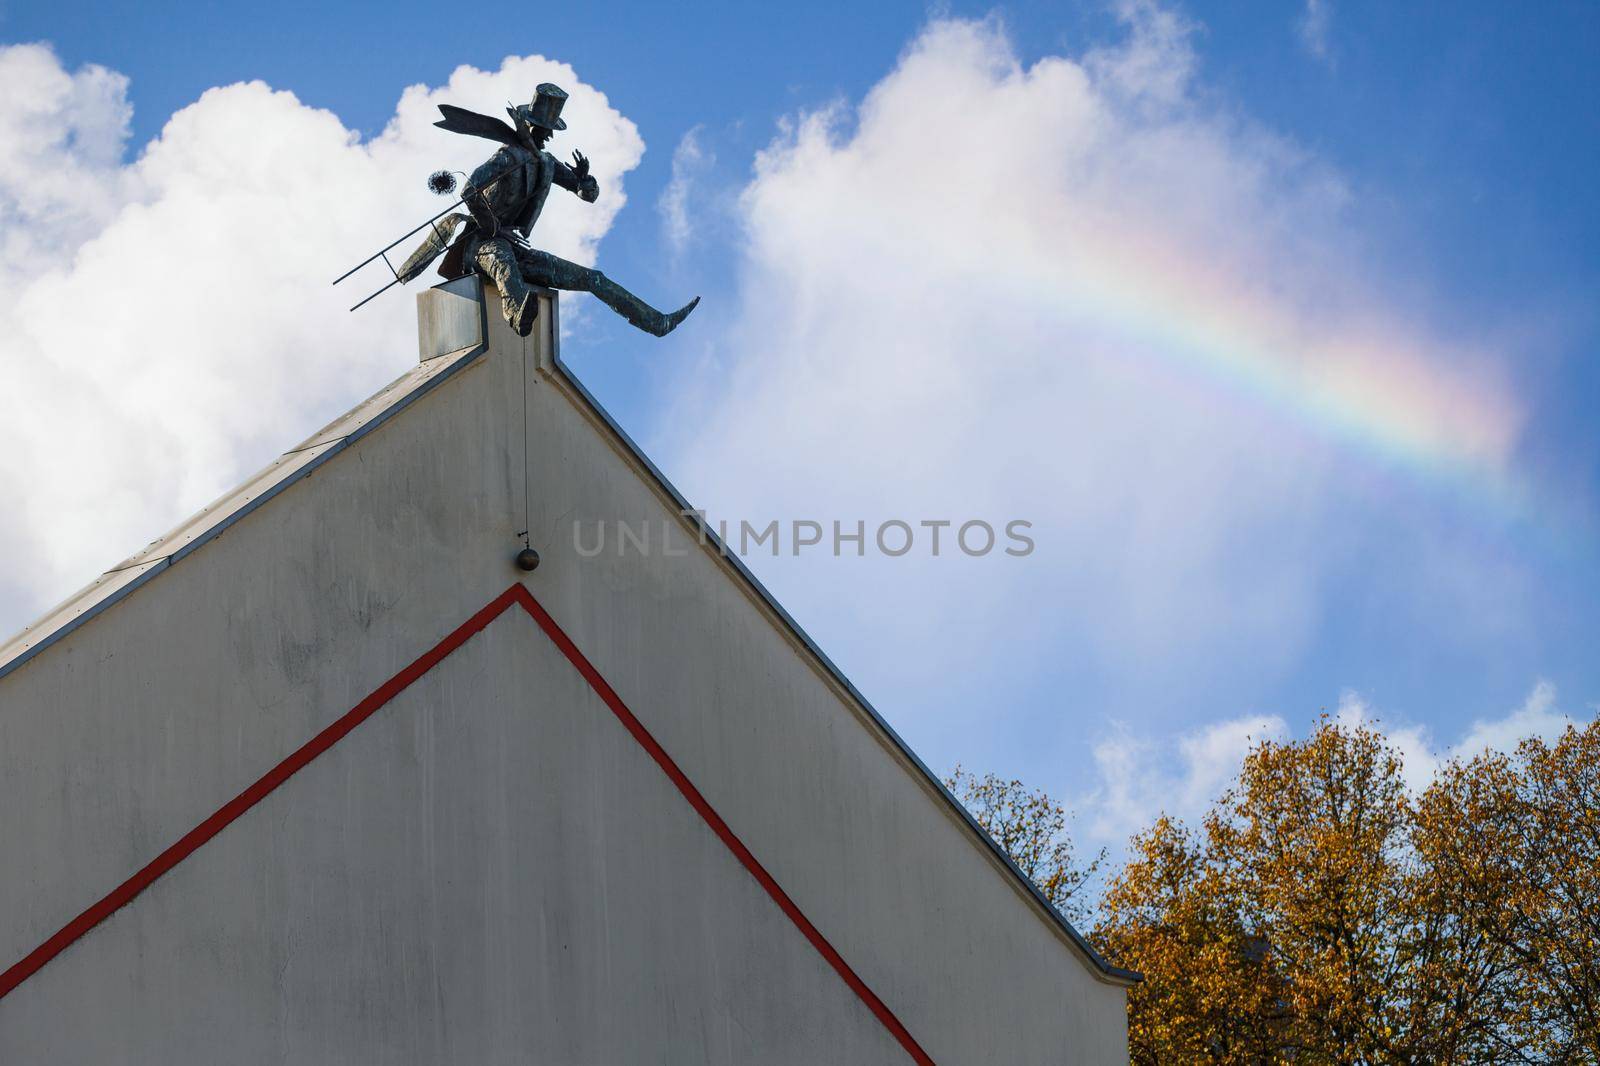 The Chimney Sweeper sitting and resting on the edge of the roof, beautiful summer sky and rainbow background. by Lincikas